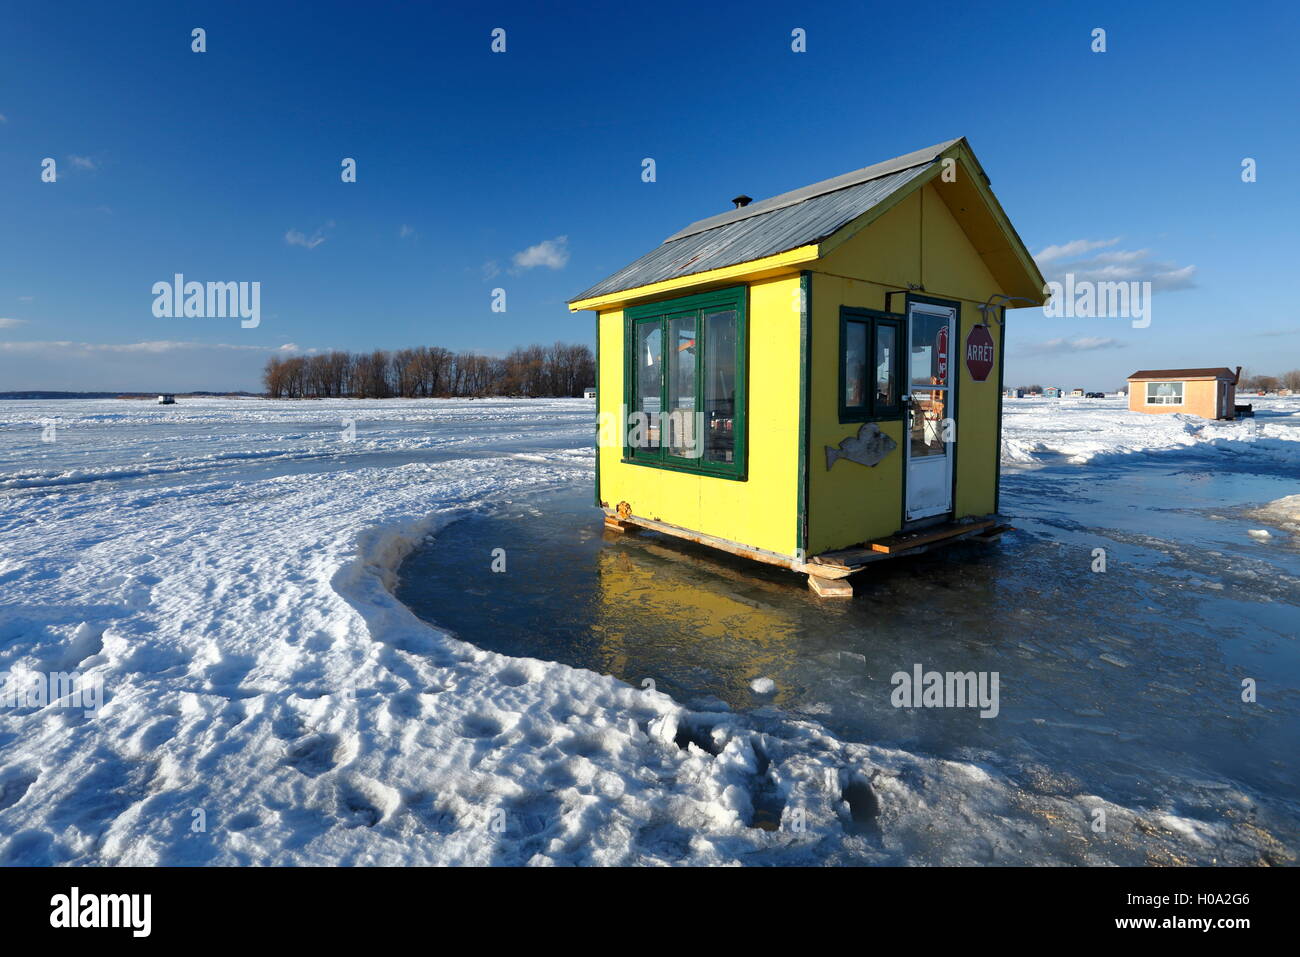 https://c8.alamy.com/comp/H0A2G6/ice-fishing-cabin-on-frozen-saint-lawrence-river-maple-grove-quebec-H0A2G6.jpg